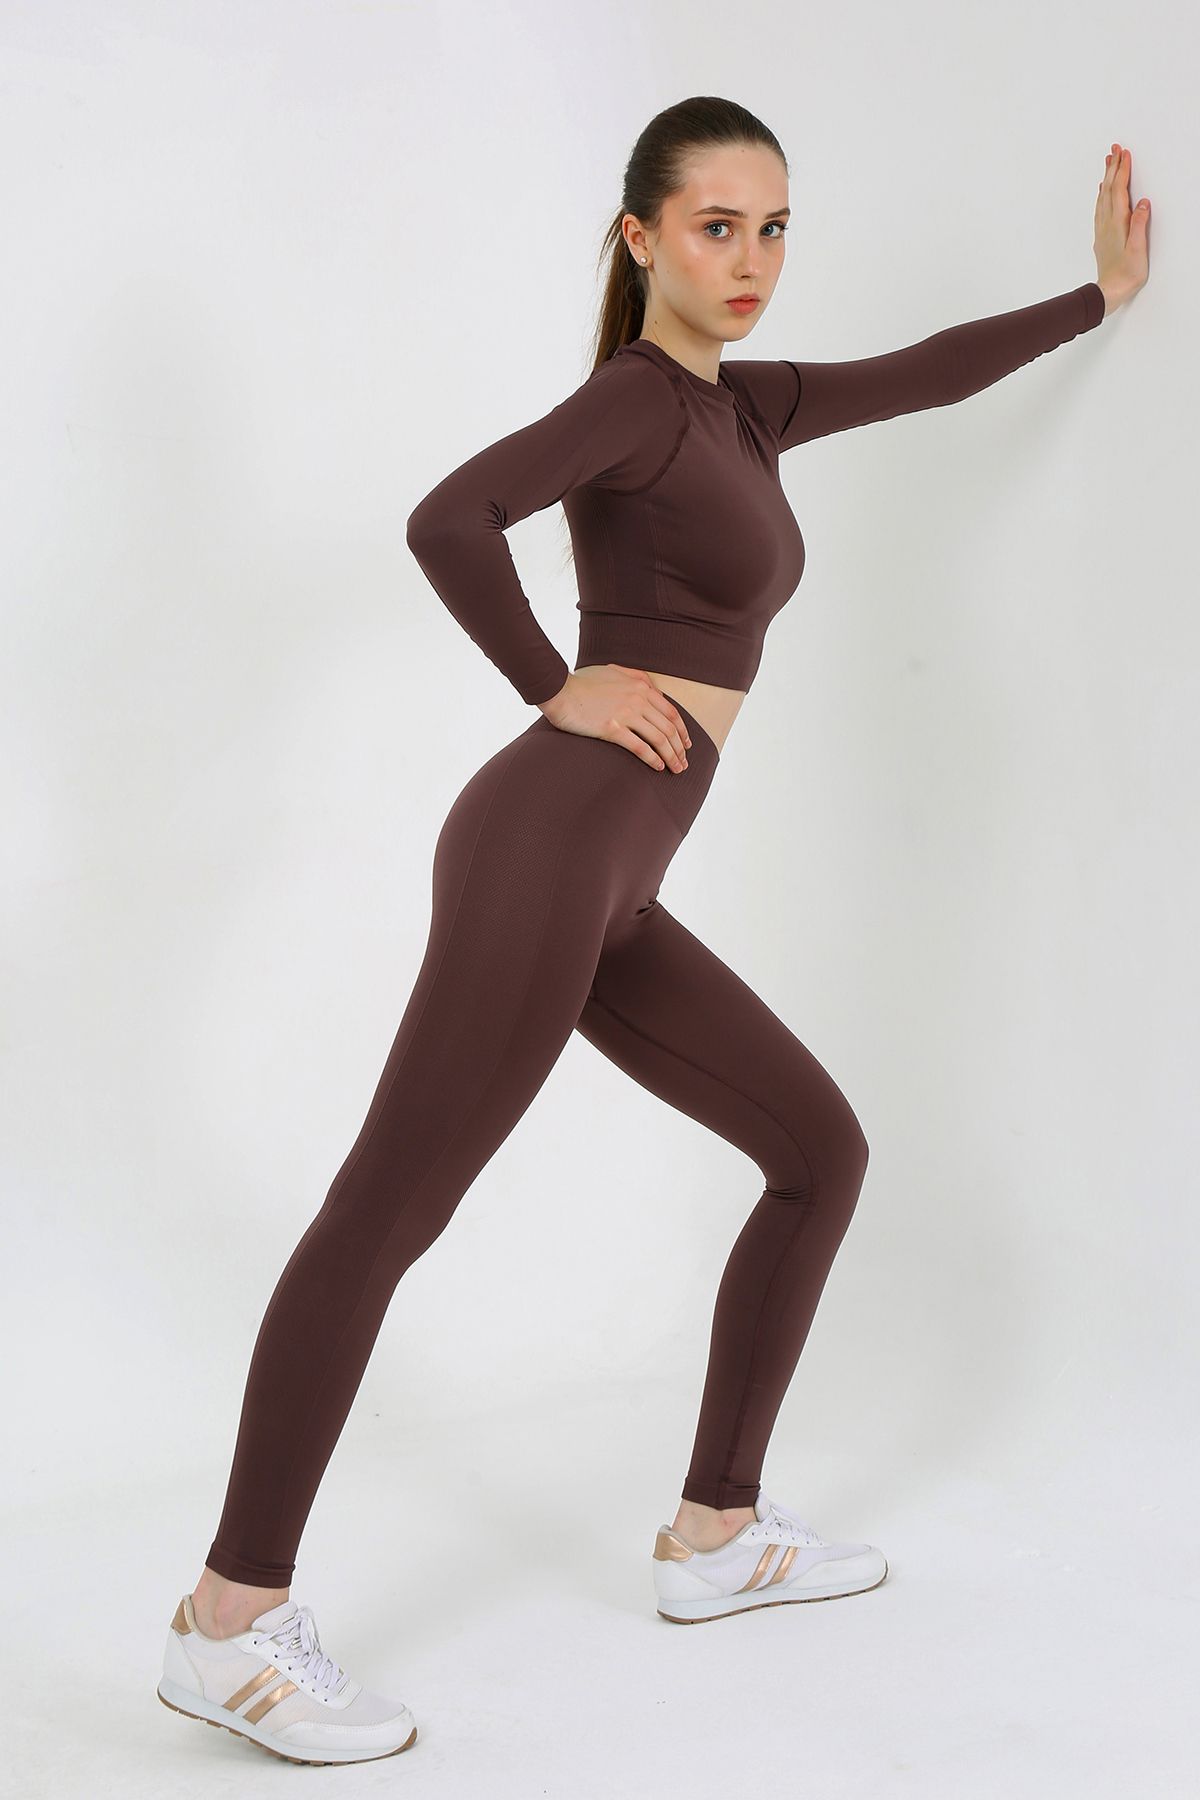 Unisex Footed Skin Color Ballet Tights – The Dance Bible